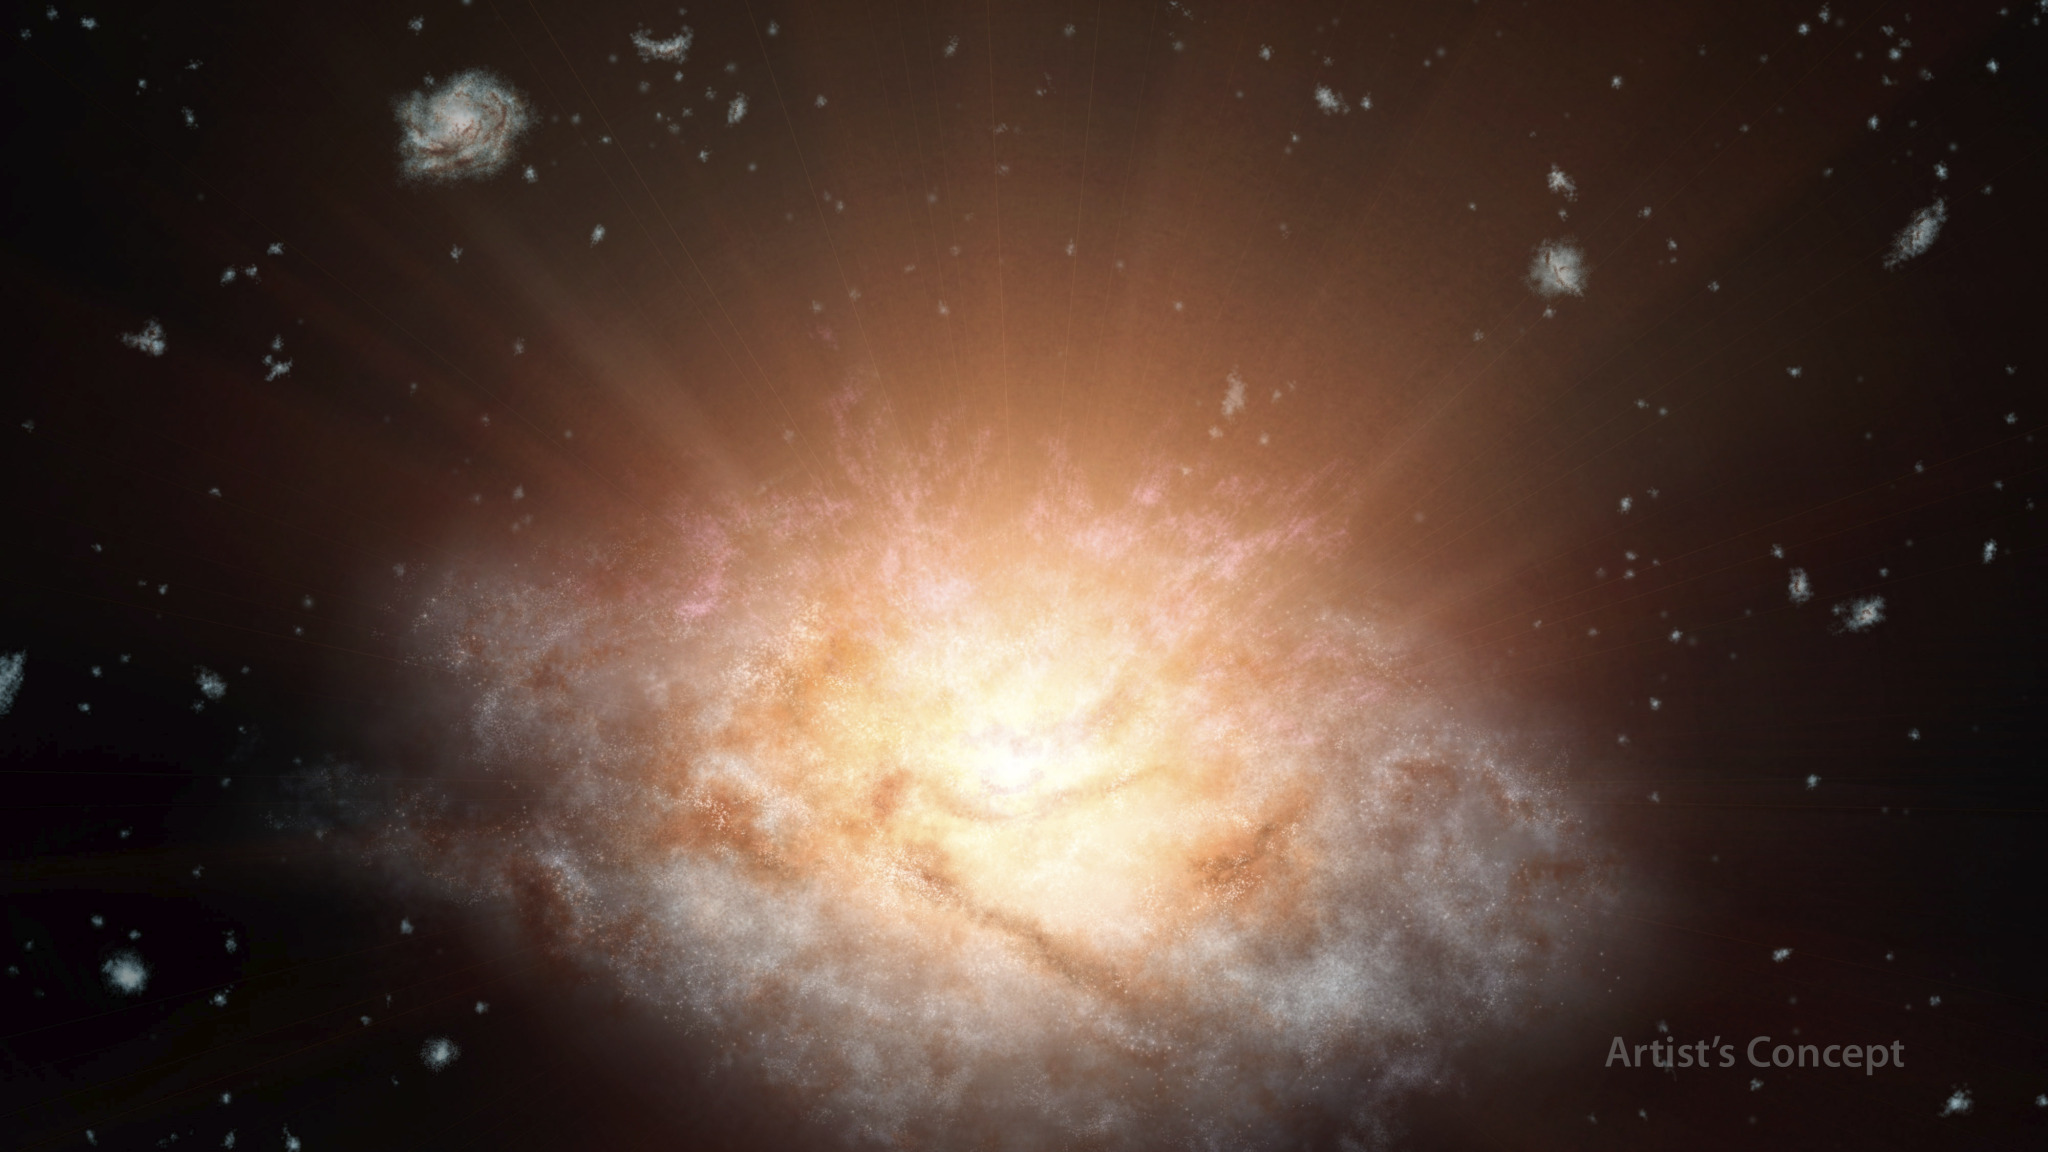 This artist's concept depicts the current record holder for the most luminous galaxy in the universe.